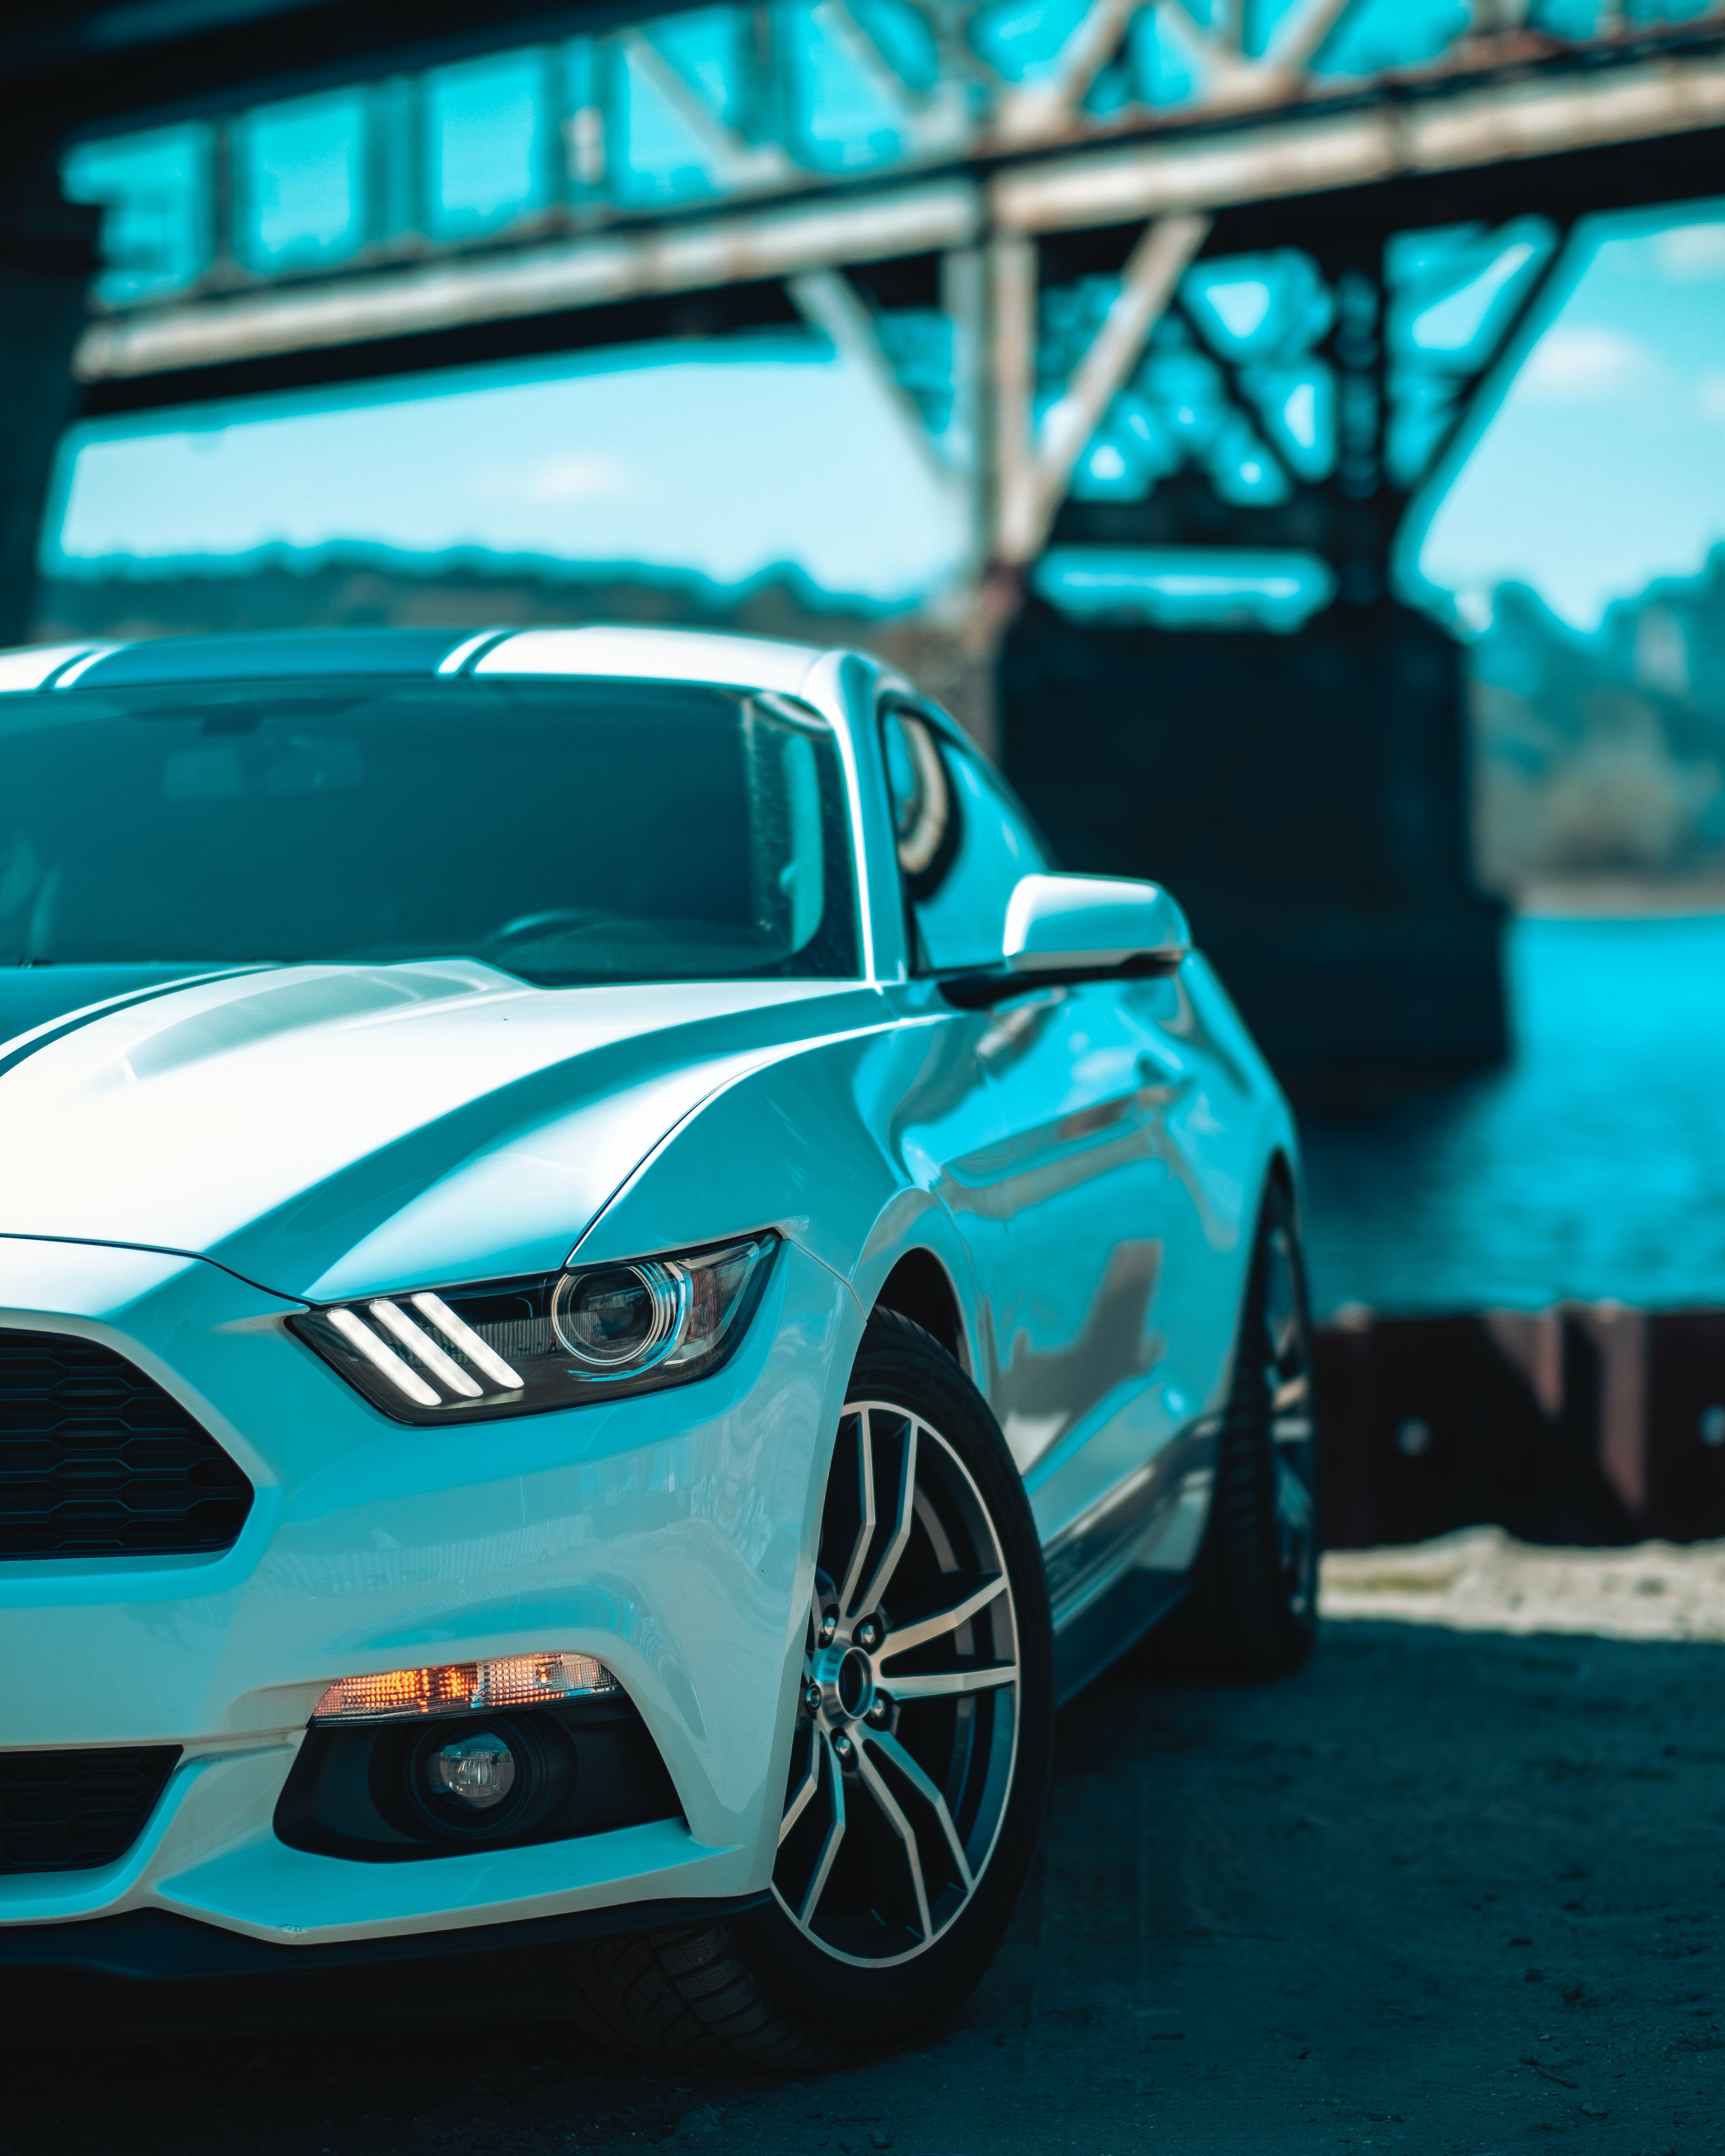 ford mustang, cars, front view, headlight, wheels Full HD